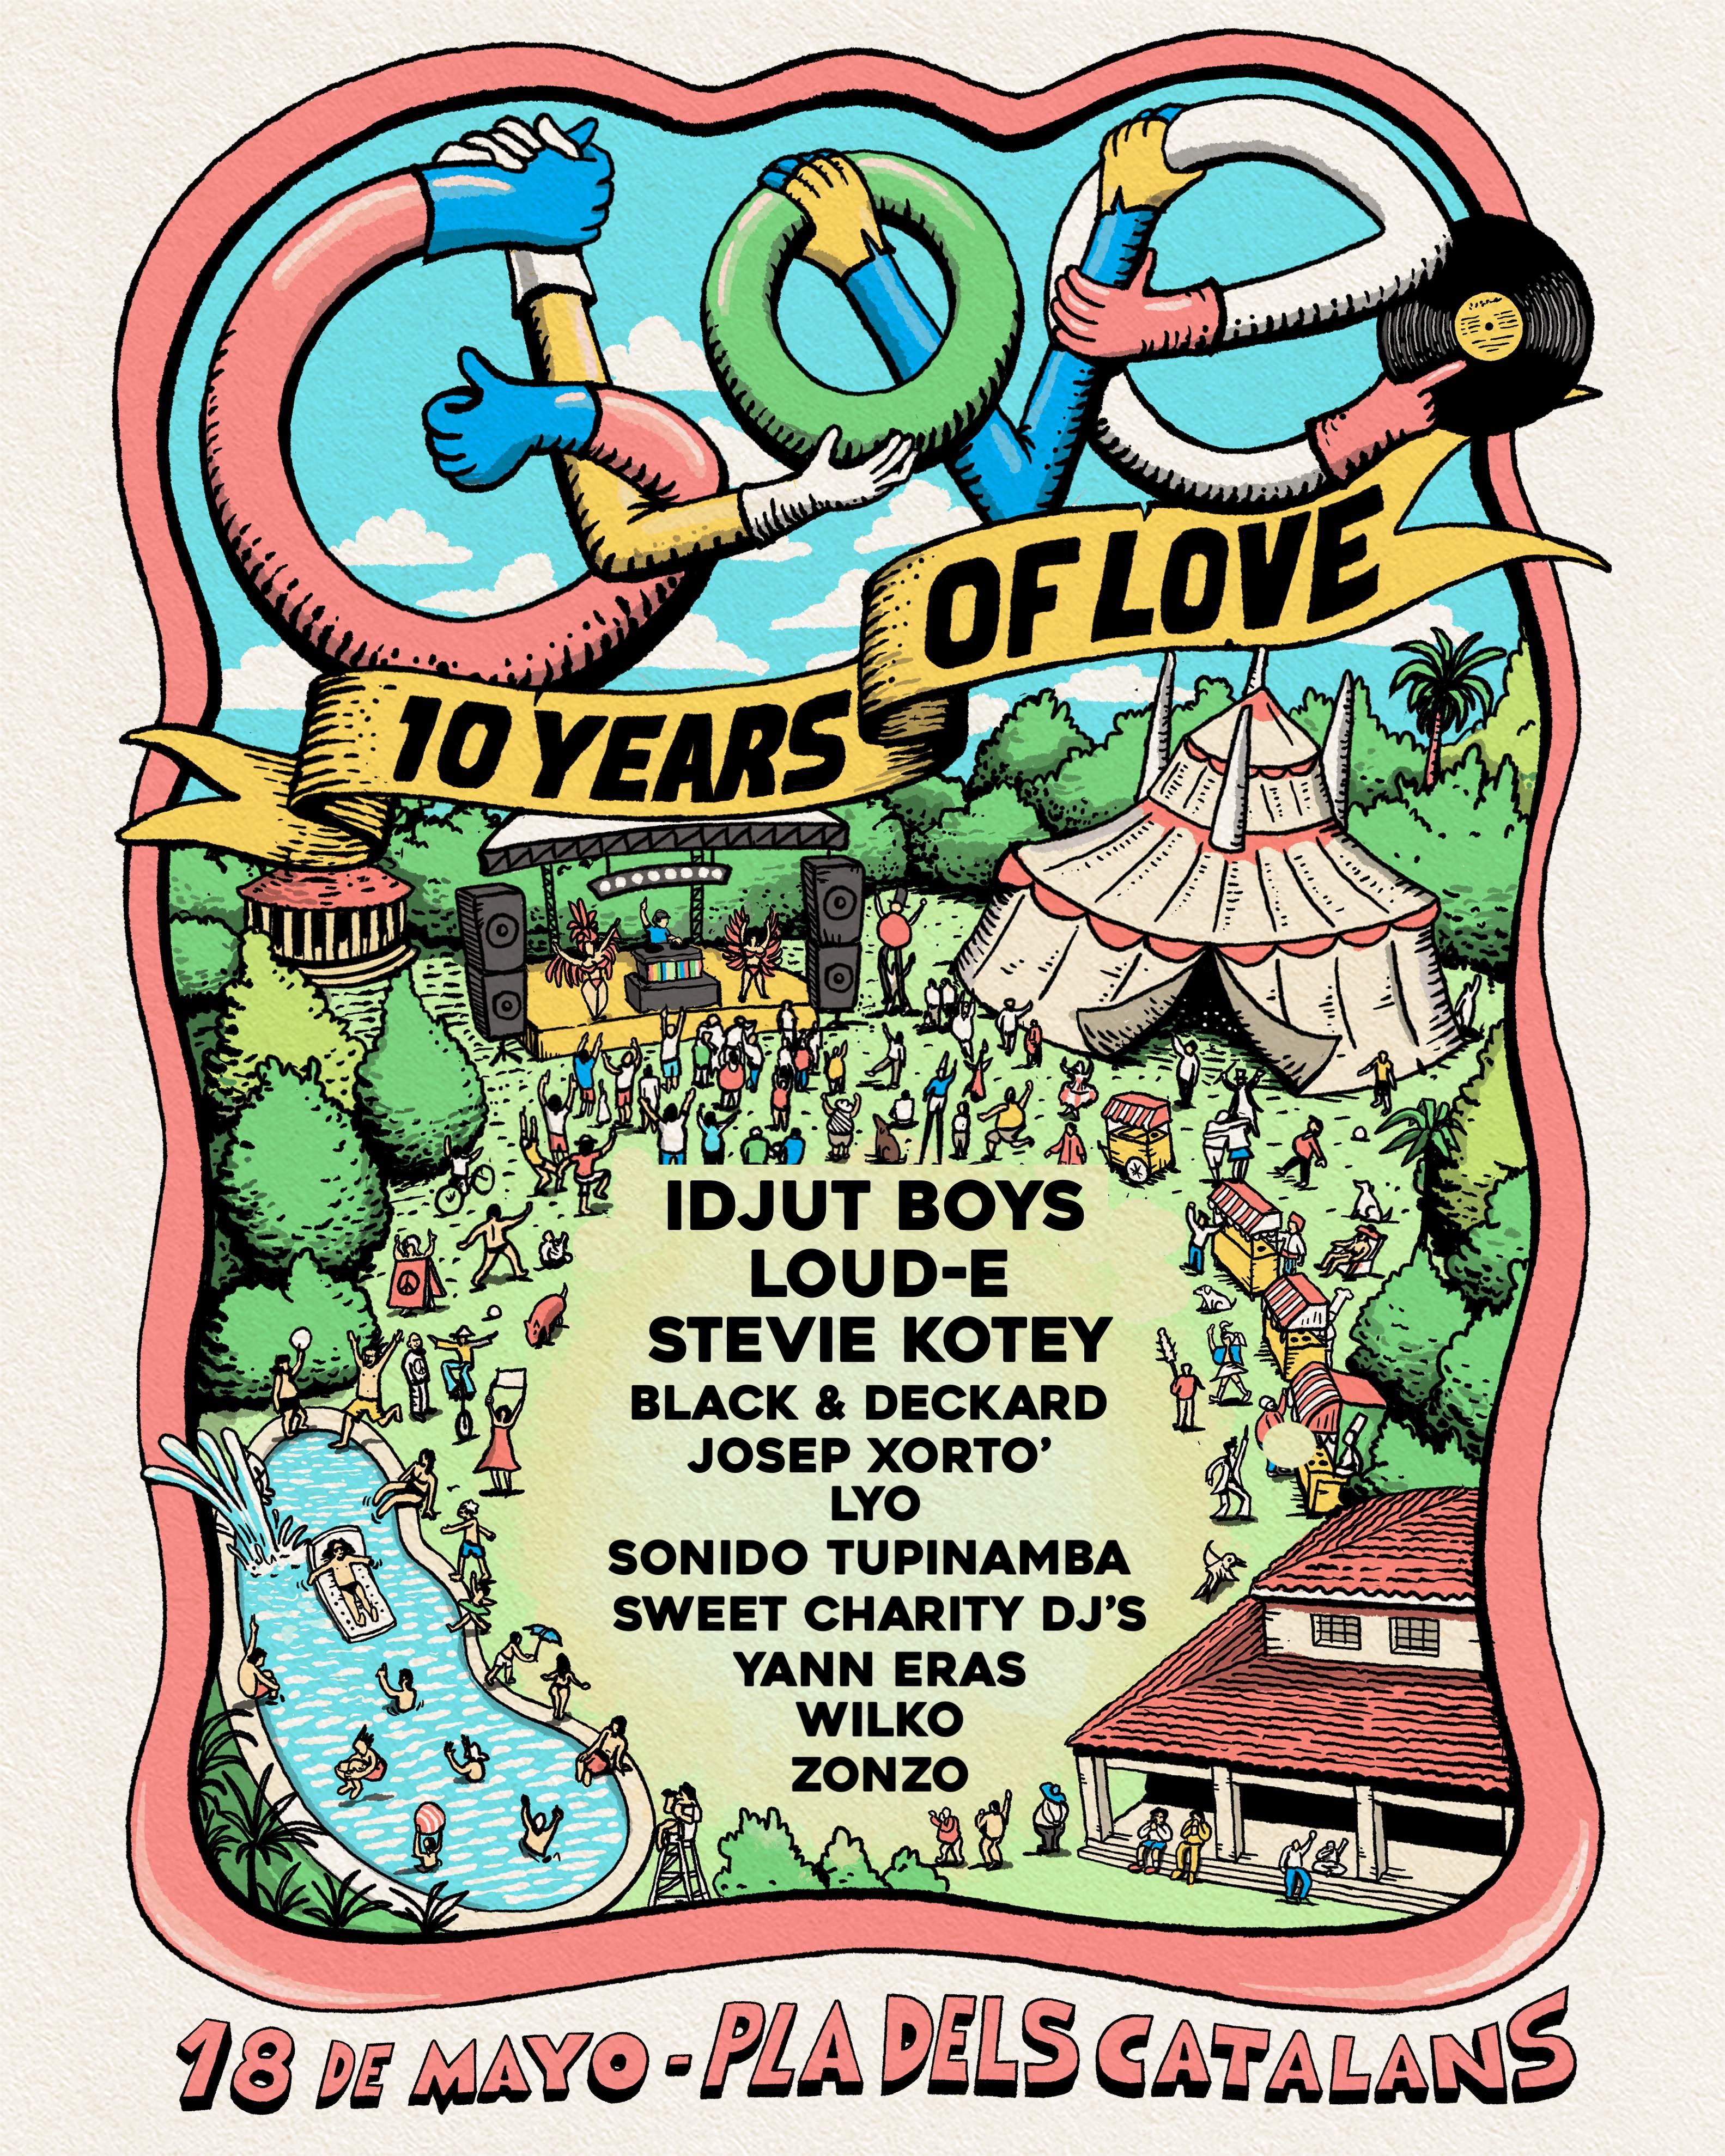 GLOVE PARTY // 10 Years of Glove - Página frontal